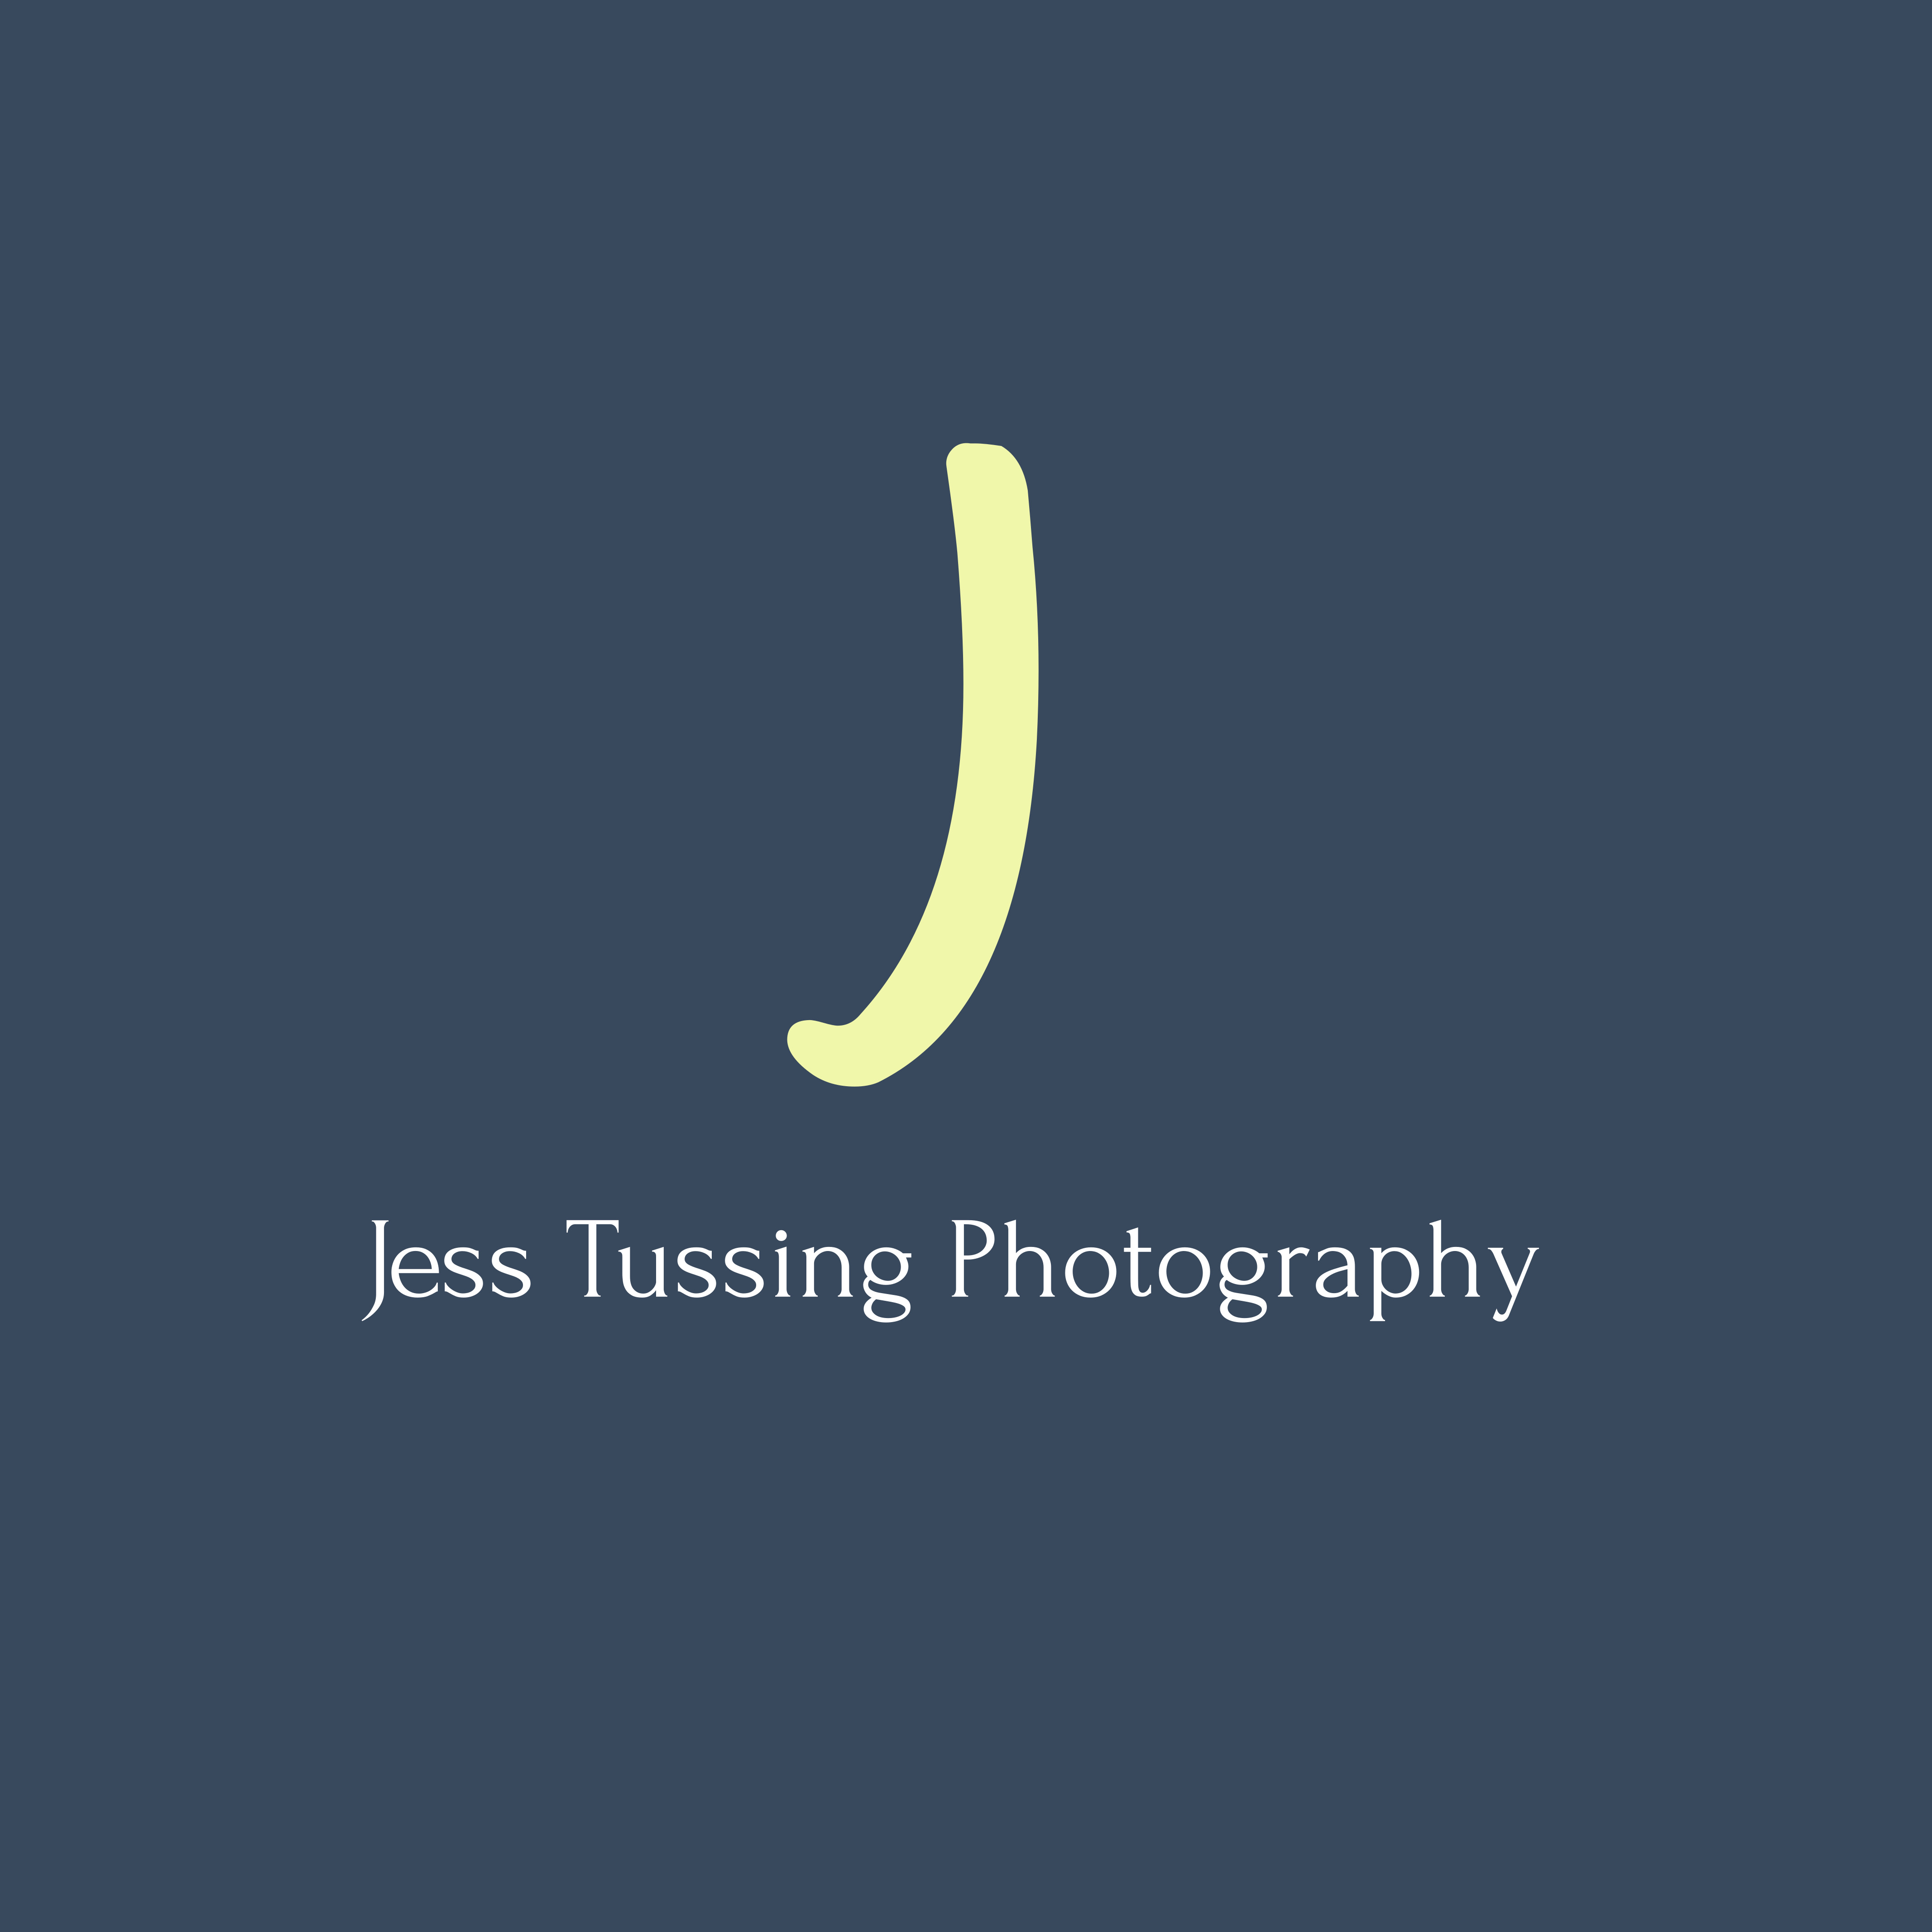 Jess Tussing Photography